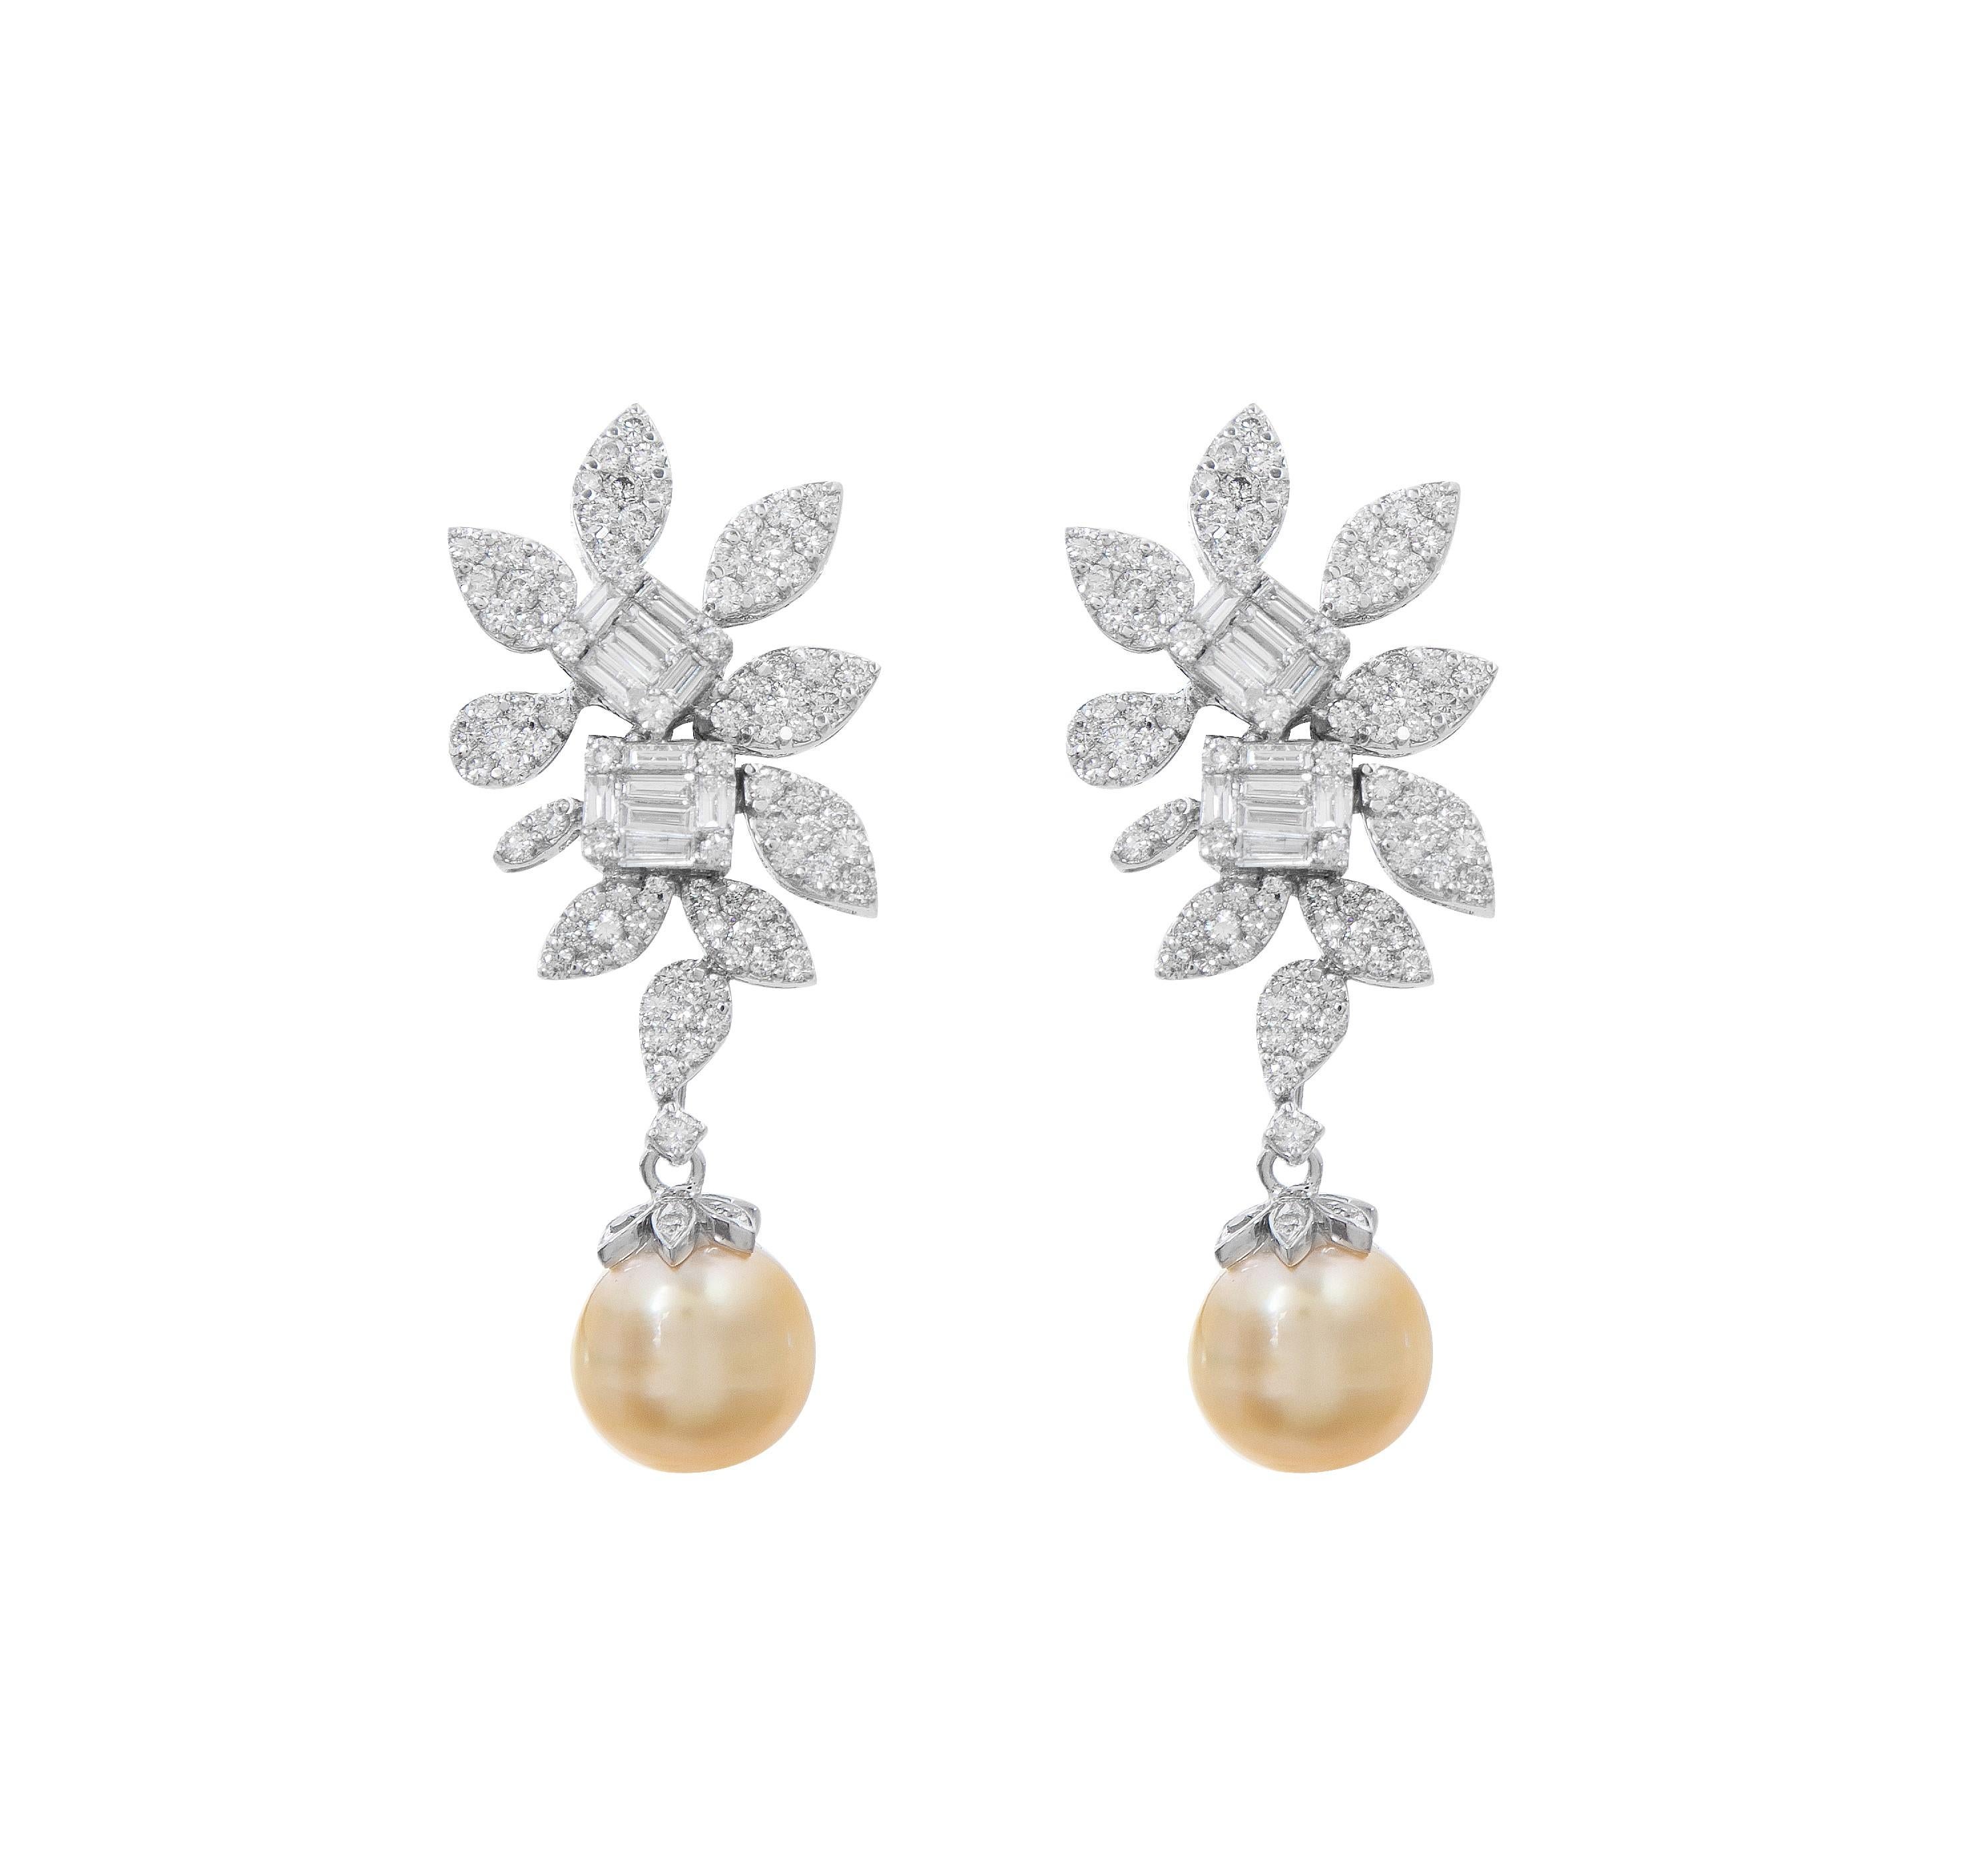 Round Cut 1.2 Carat Diamond and 17.5 Carats South Sea Pearl Drop Earring